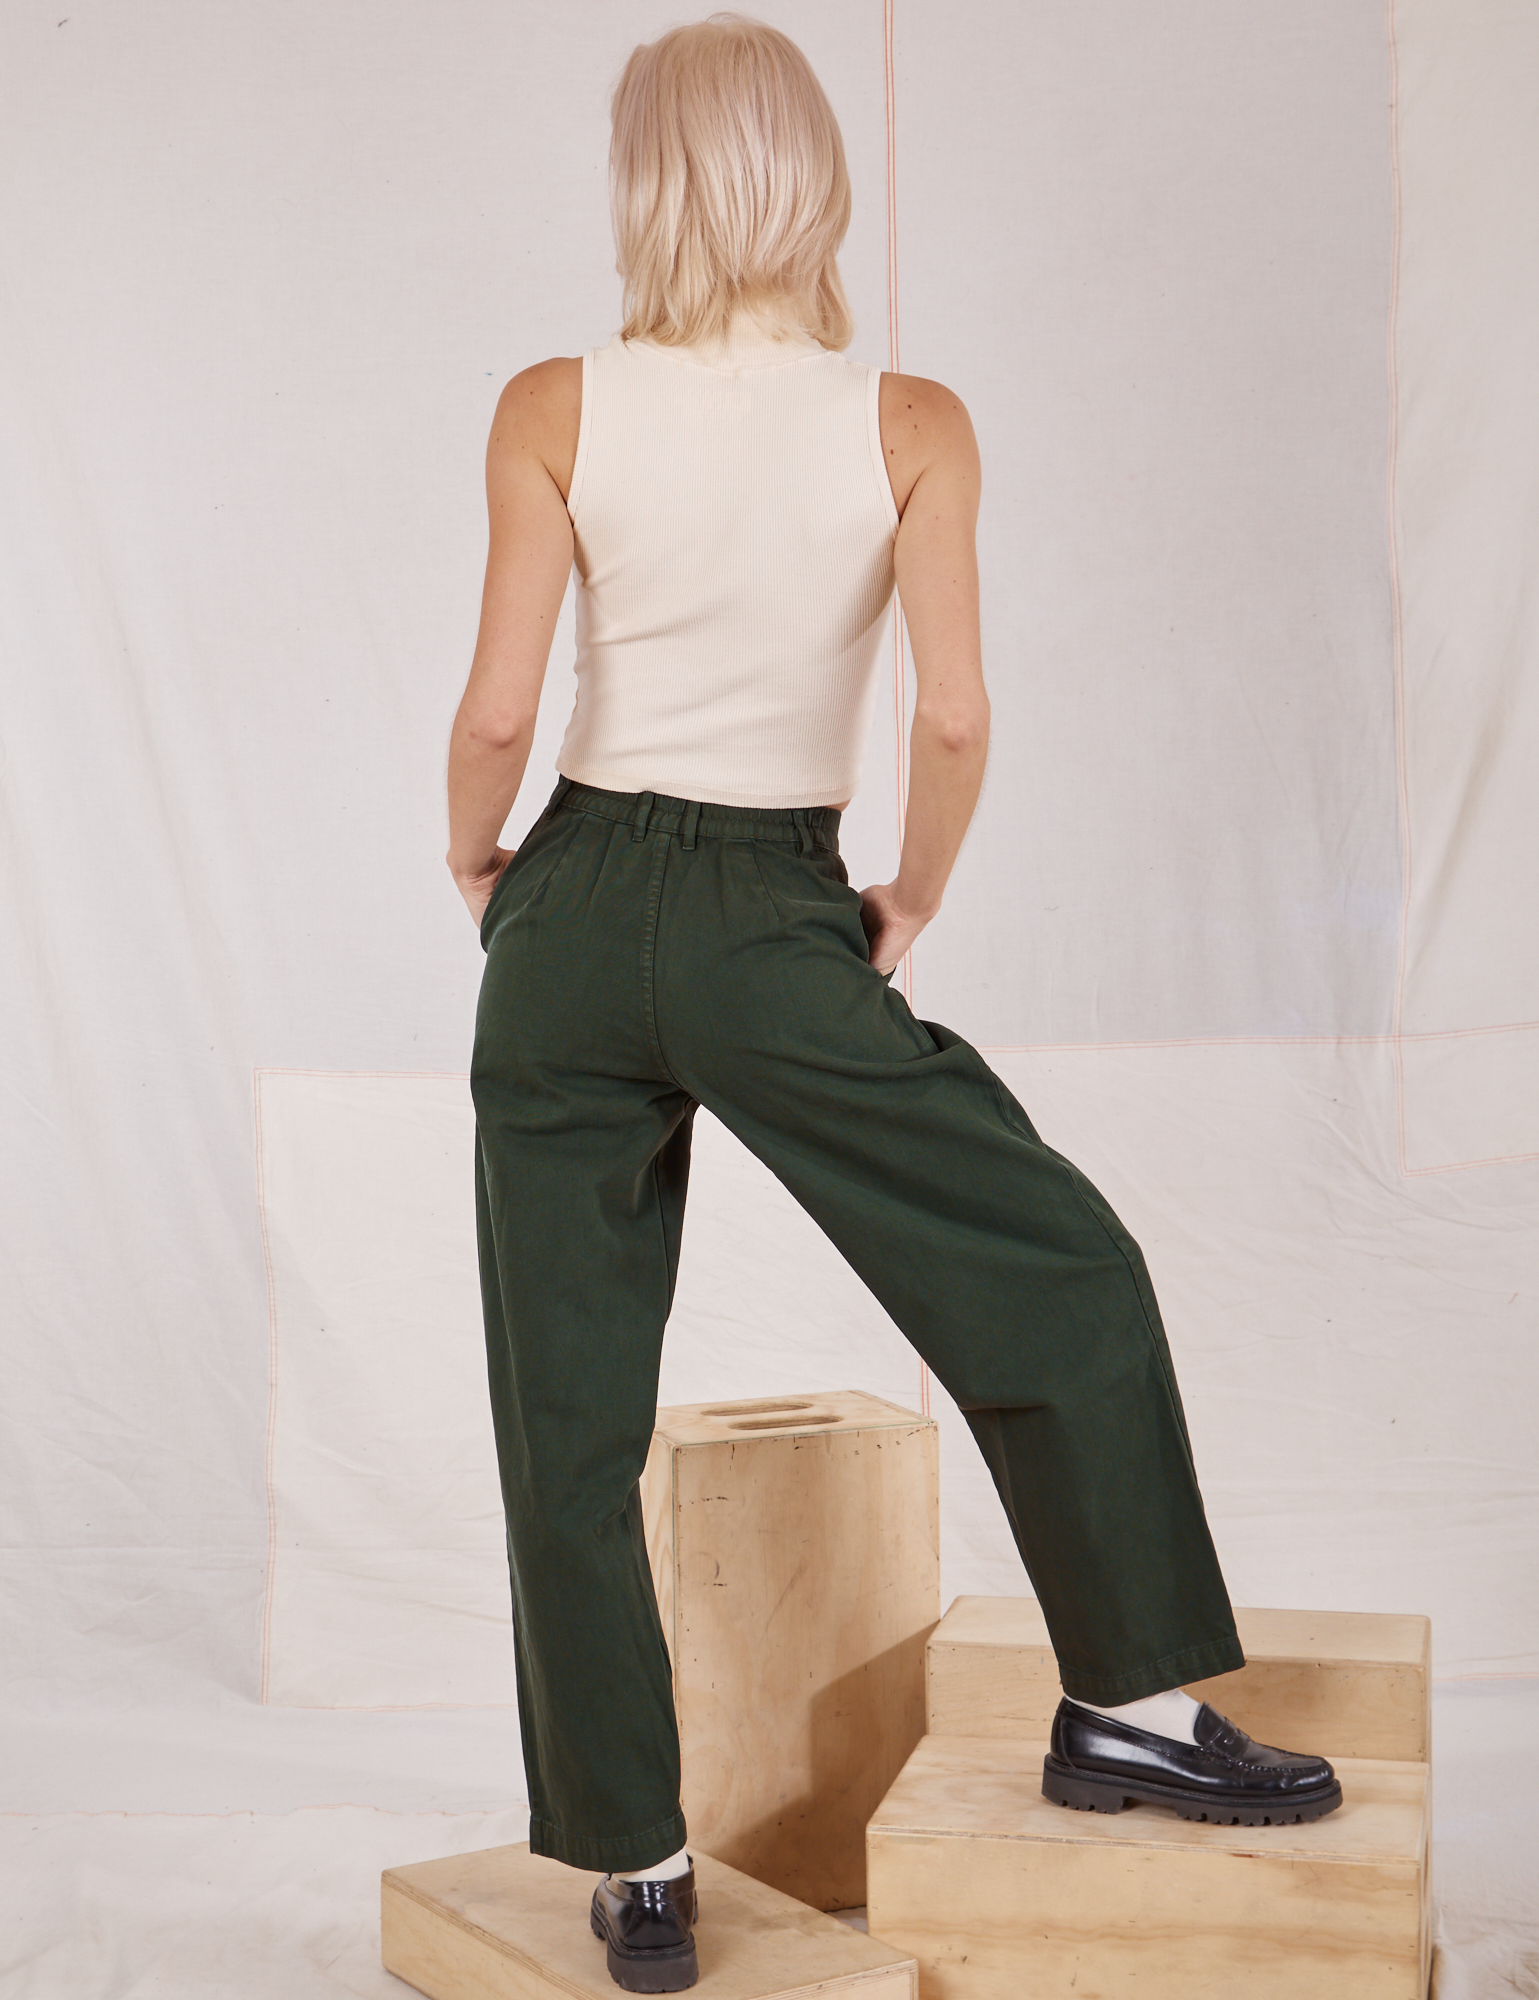 Back view of Heavyweight Trousers in Swamp Green and Sleeveless Turtleneck in vintage tee off-white on Madeline